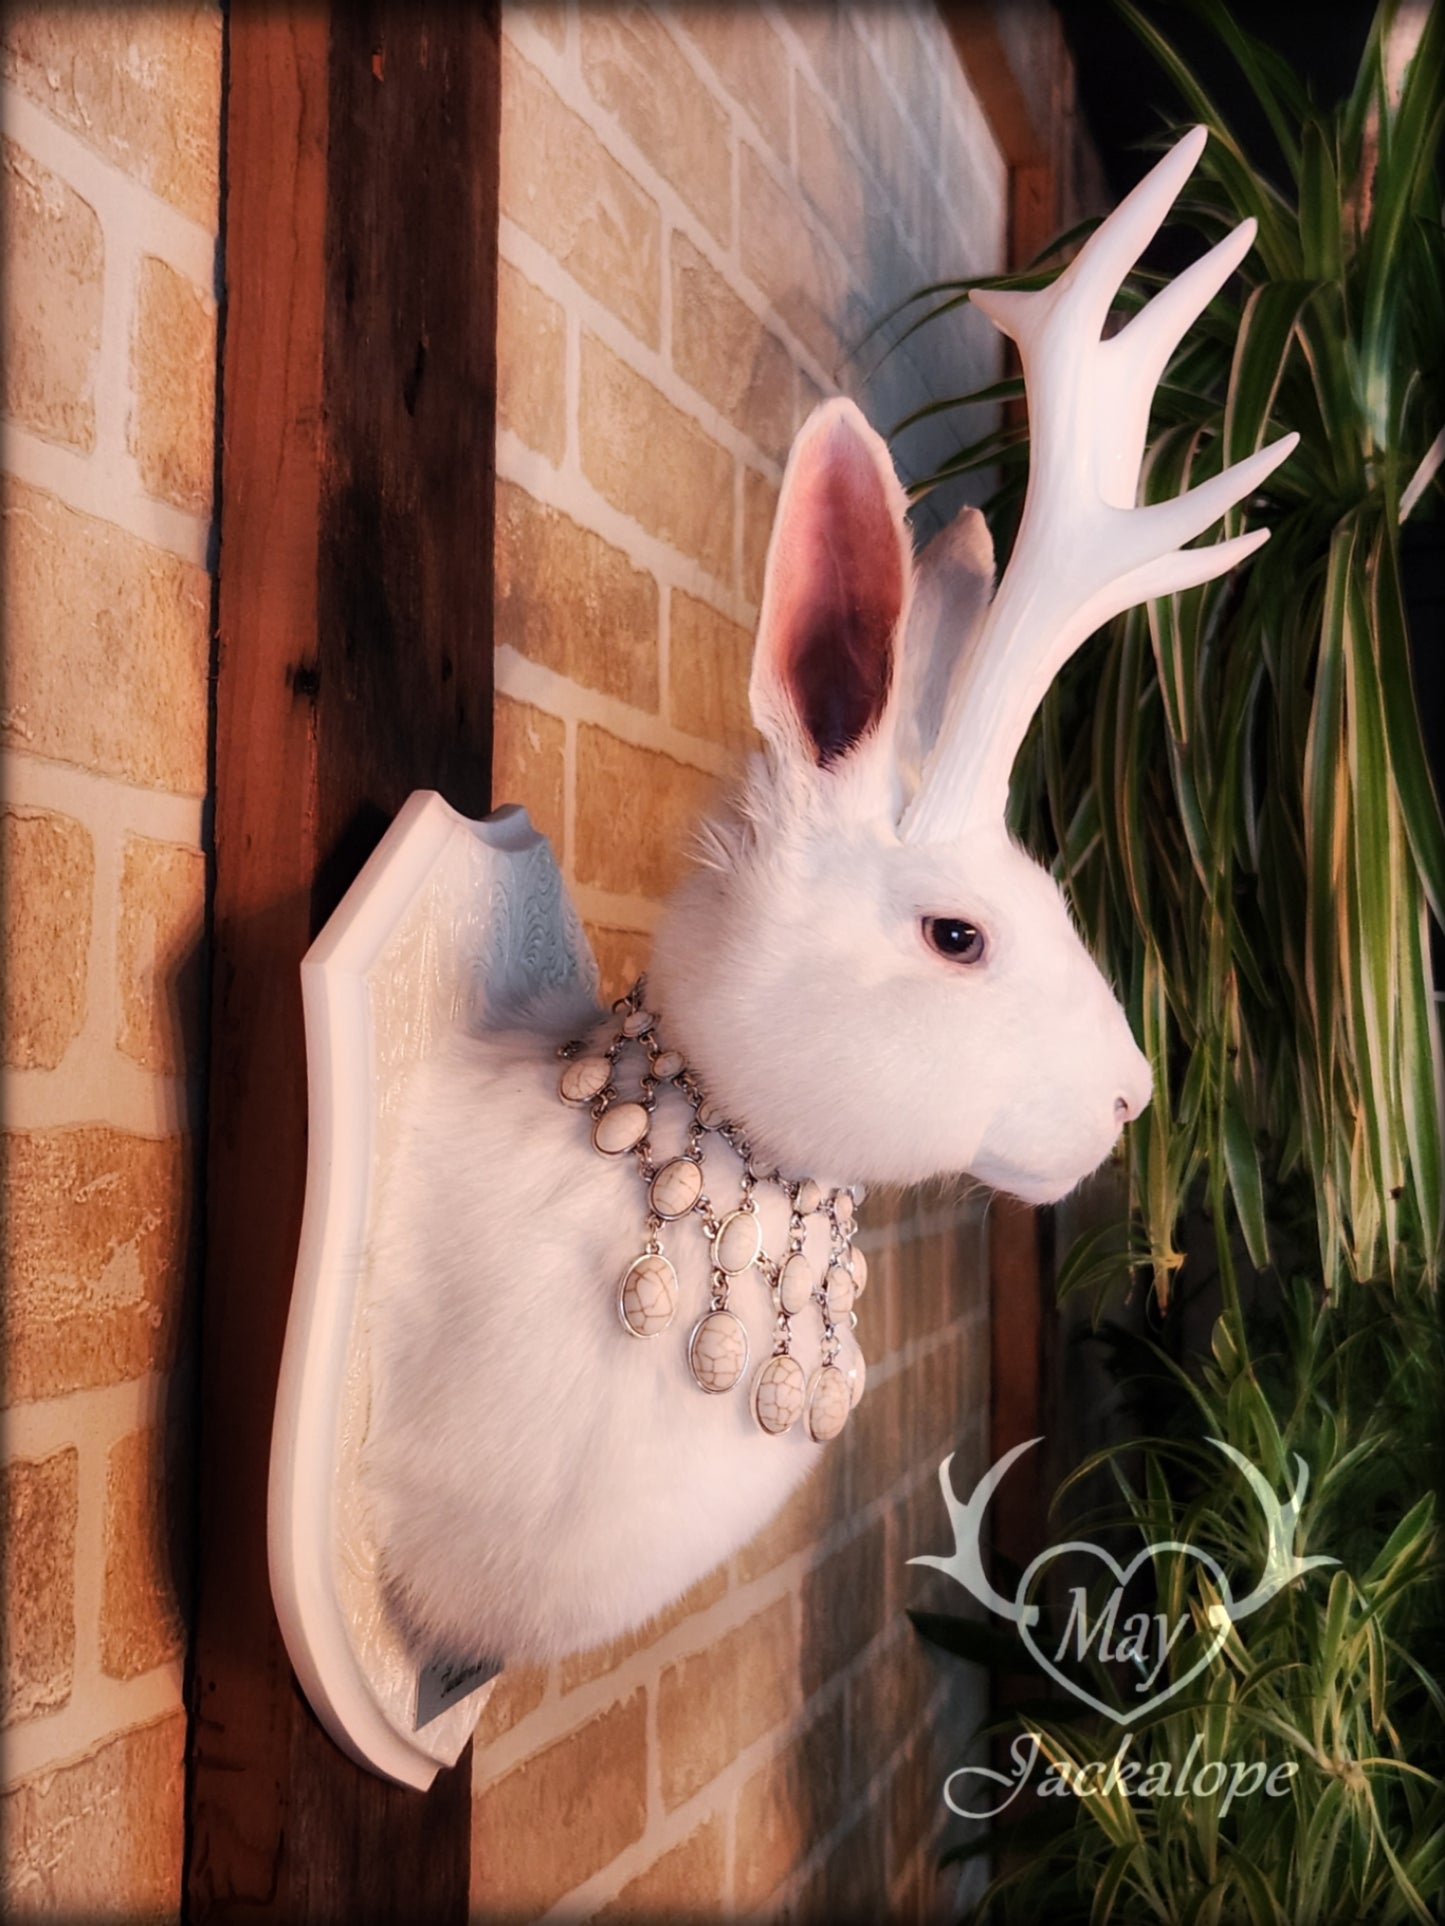 White Jackalope taxidermy with grey eyes, white antlers replica & a necklace